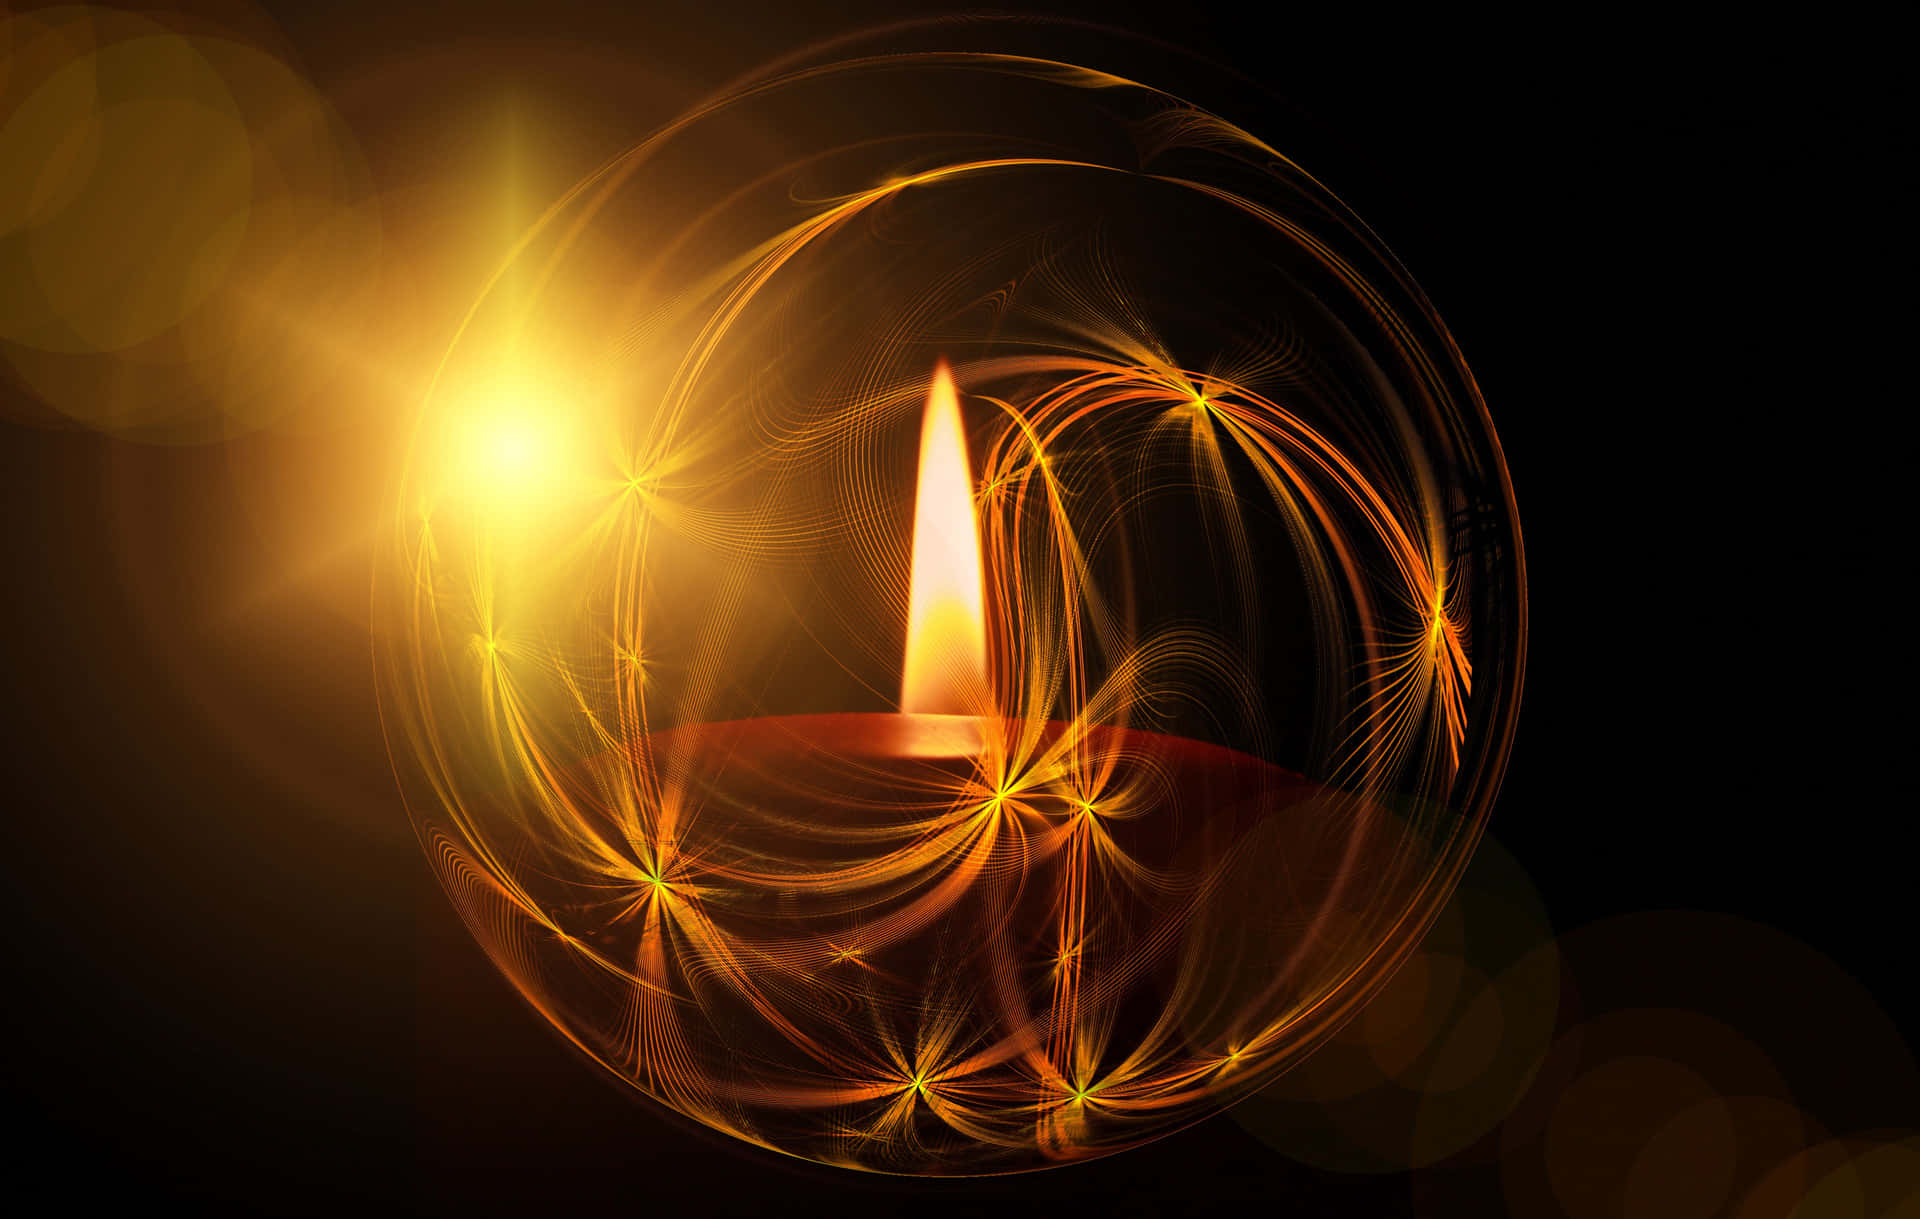 A Candle With A Golden Light On A Black Background